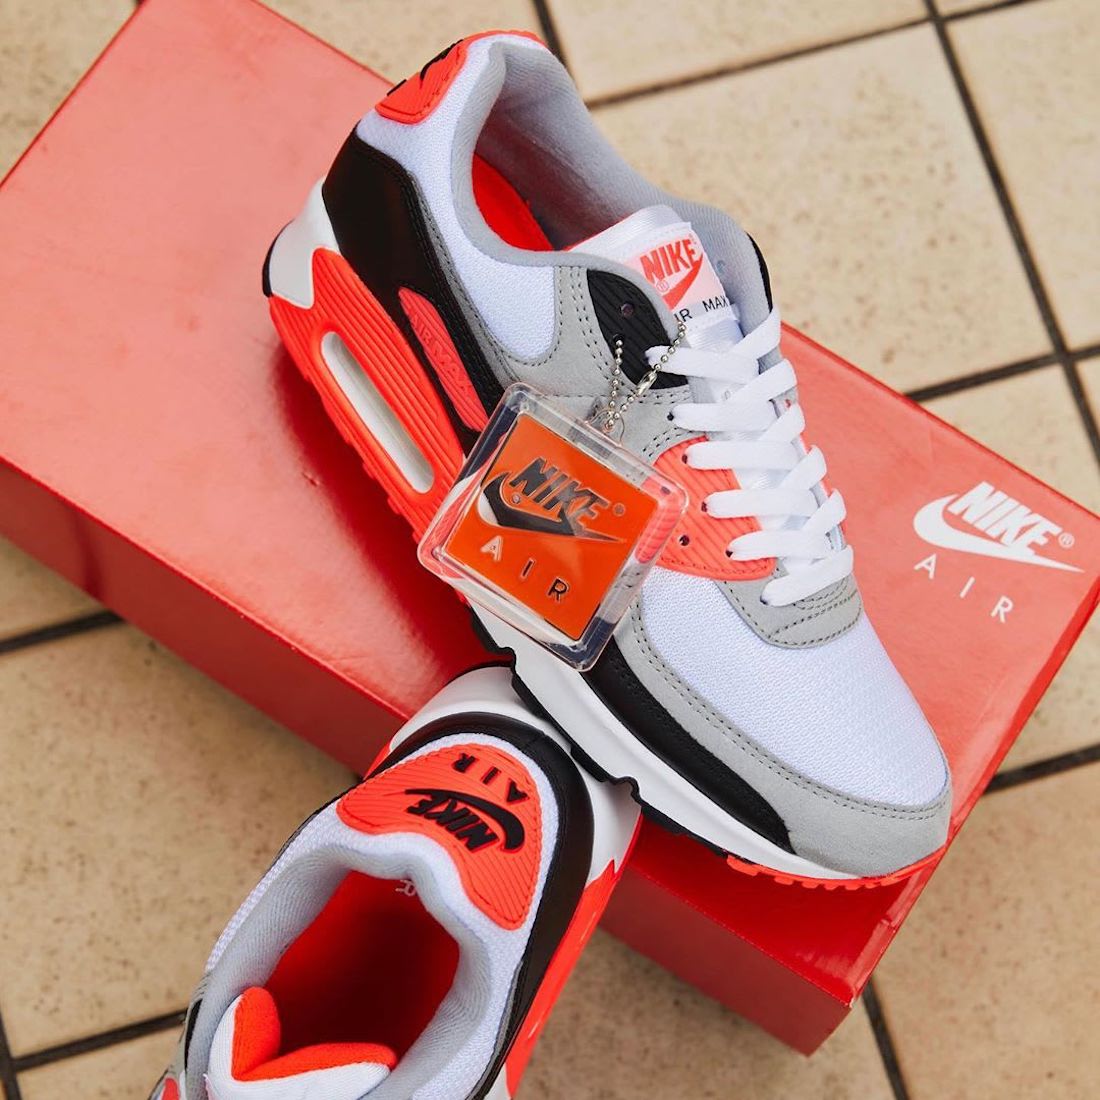 nike air max 90 infrared 2020 release date